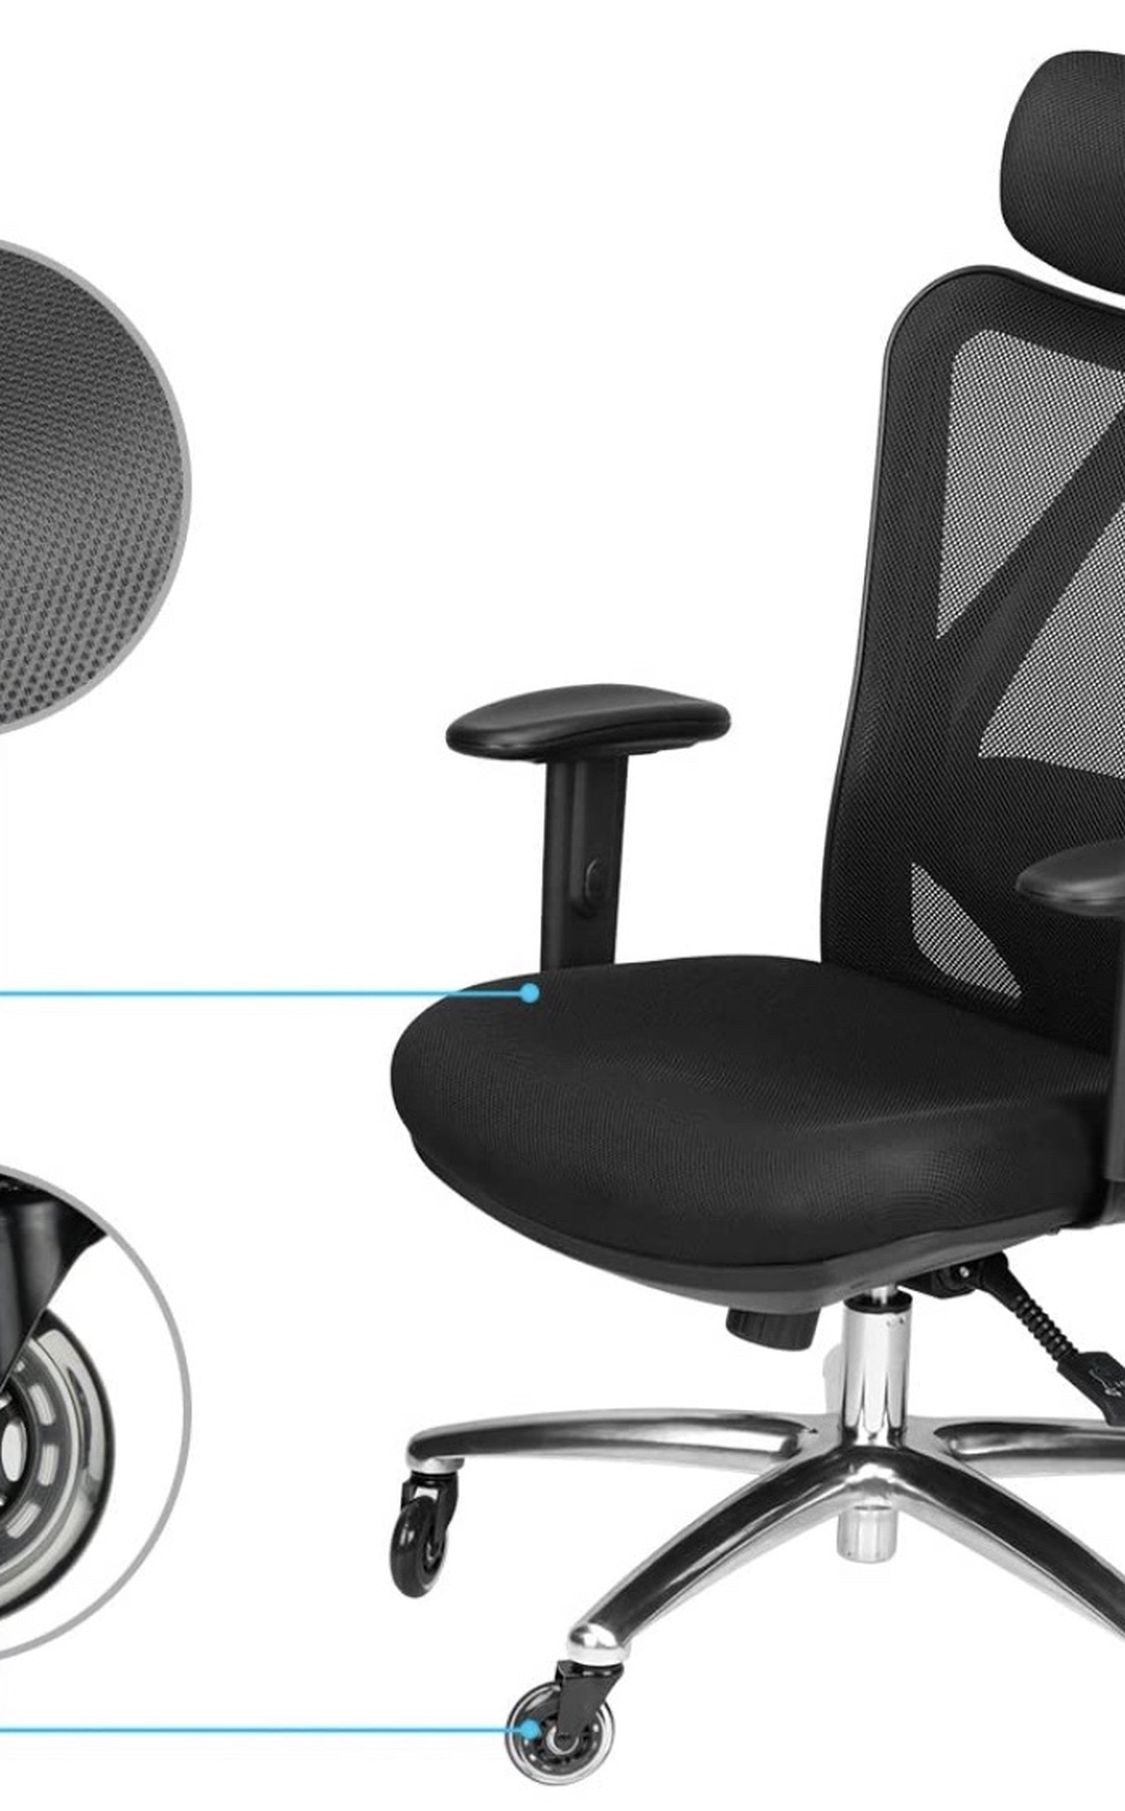 Office Chair - Ergonomic Adjustable And Very Comfortable